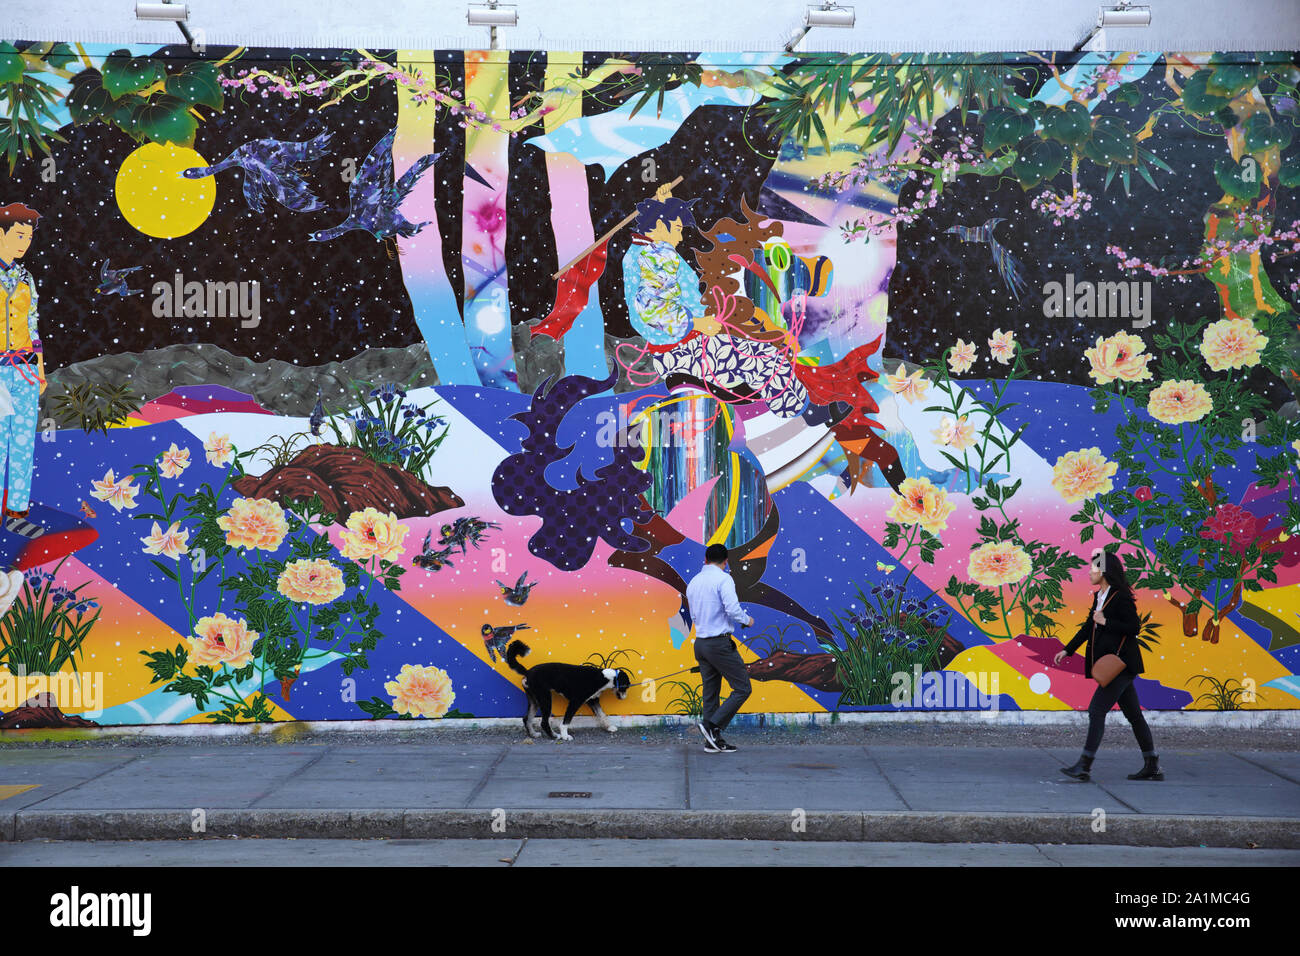 New York, NY USA - September 27, 2019: View of the fine art painting by Tomokazu Matsuyama on the Bowery Mural Wall at the corner of Houston Street an Stock Photo